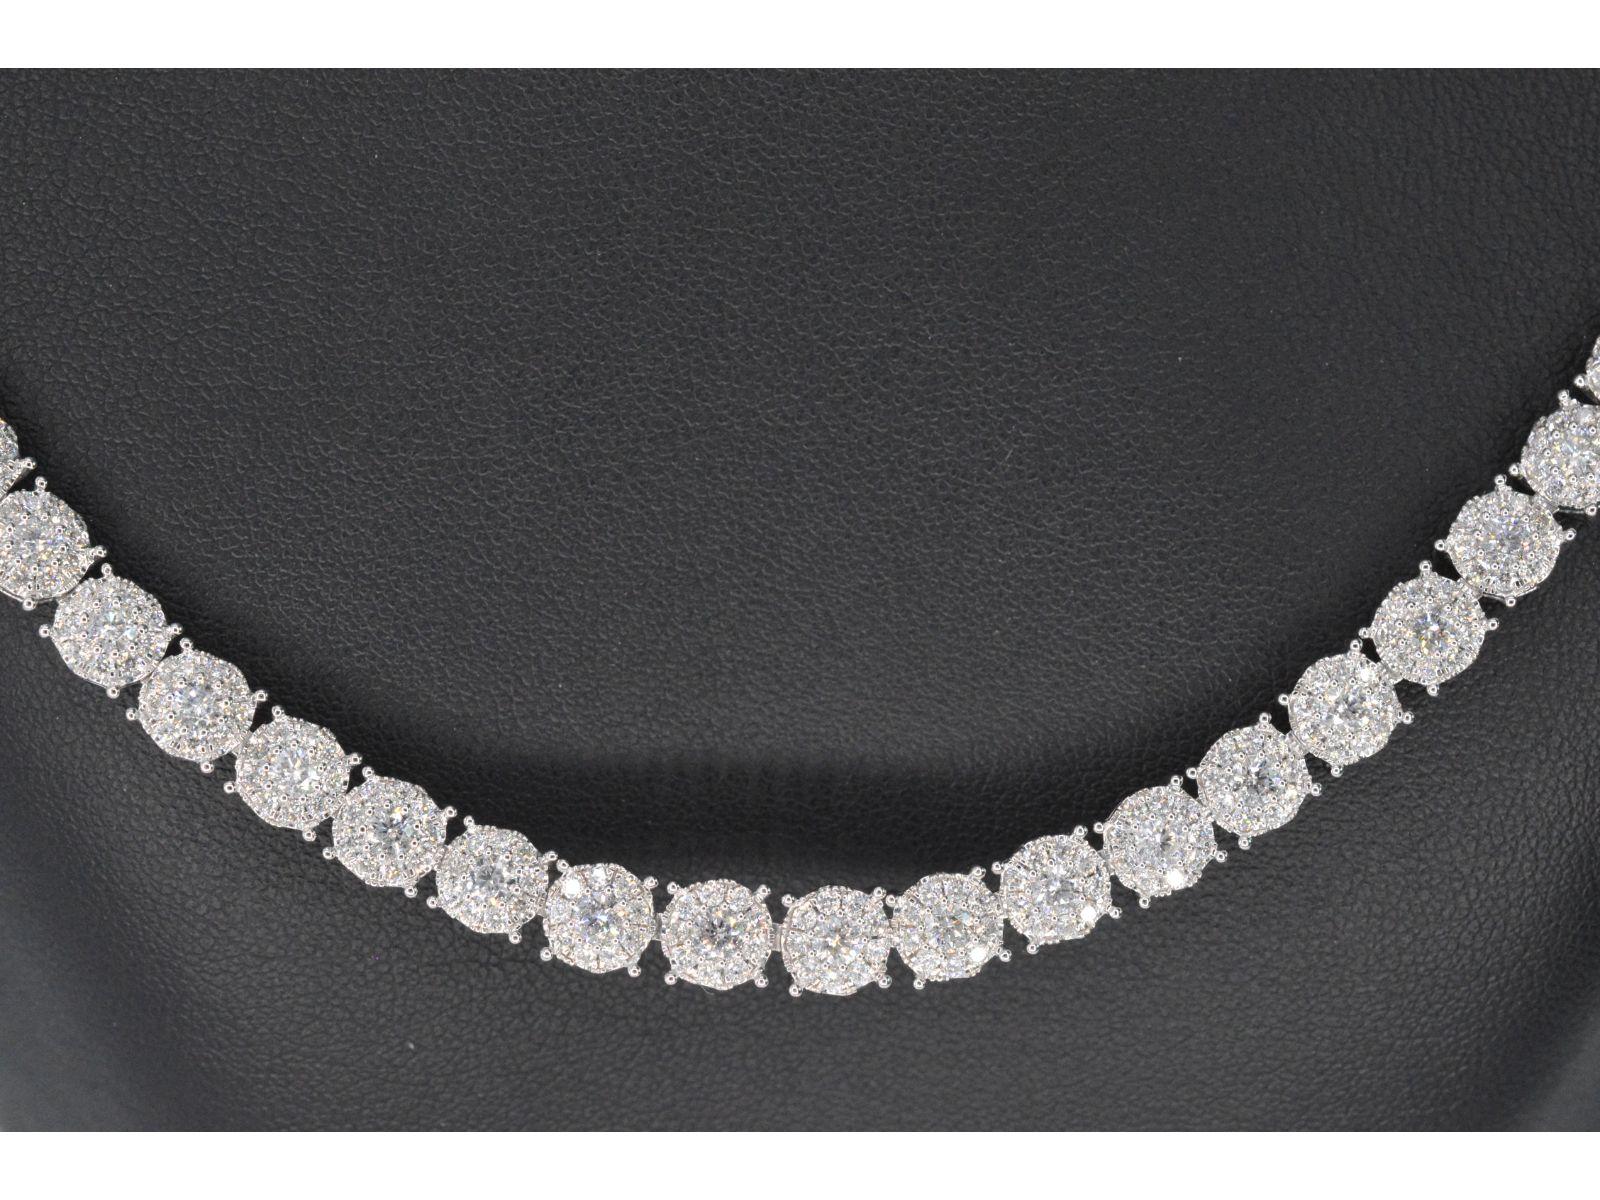 Introducing our stunning White Gold Necklace with Diamonds weighing a total of 10.00 carats. This exquisite piece features brilliant cut diamonds with a colour grade of F-G and a clarity grade of SI-P. Crafted with 18 karat 750 white gold, this